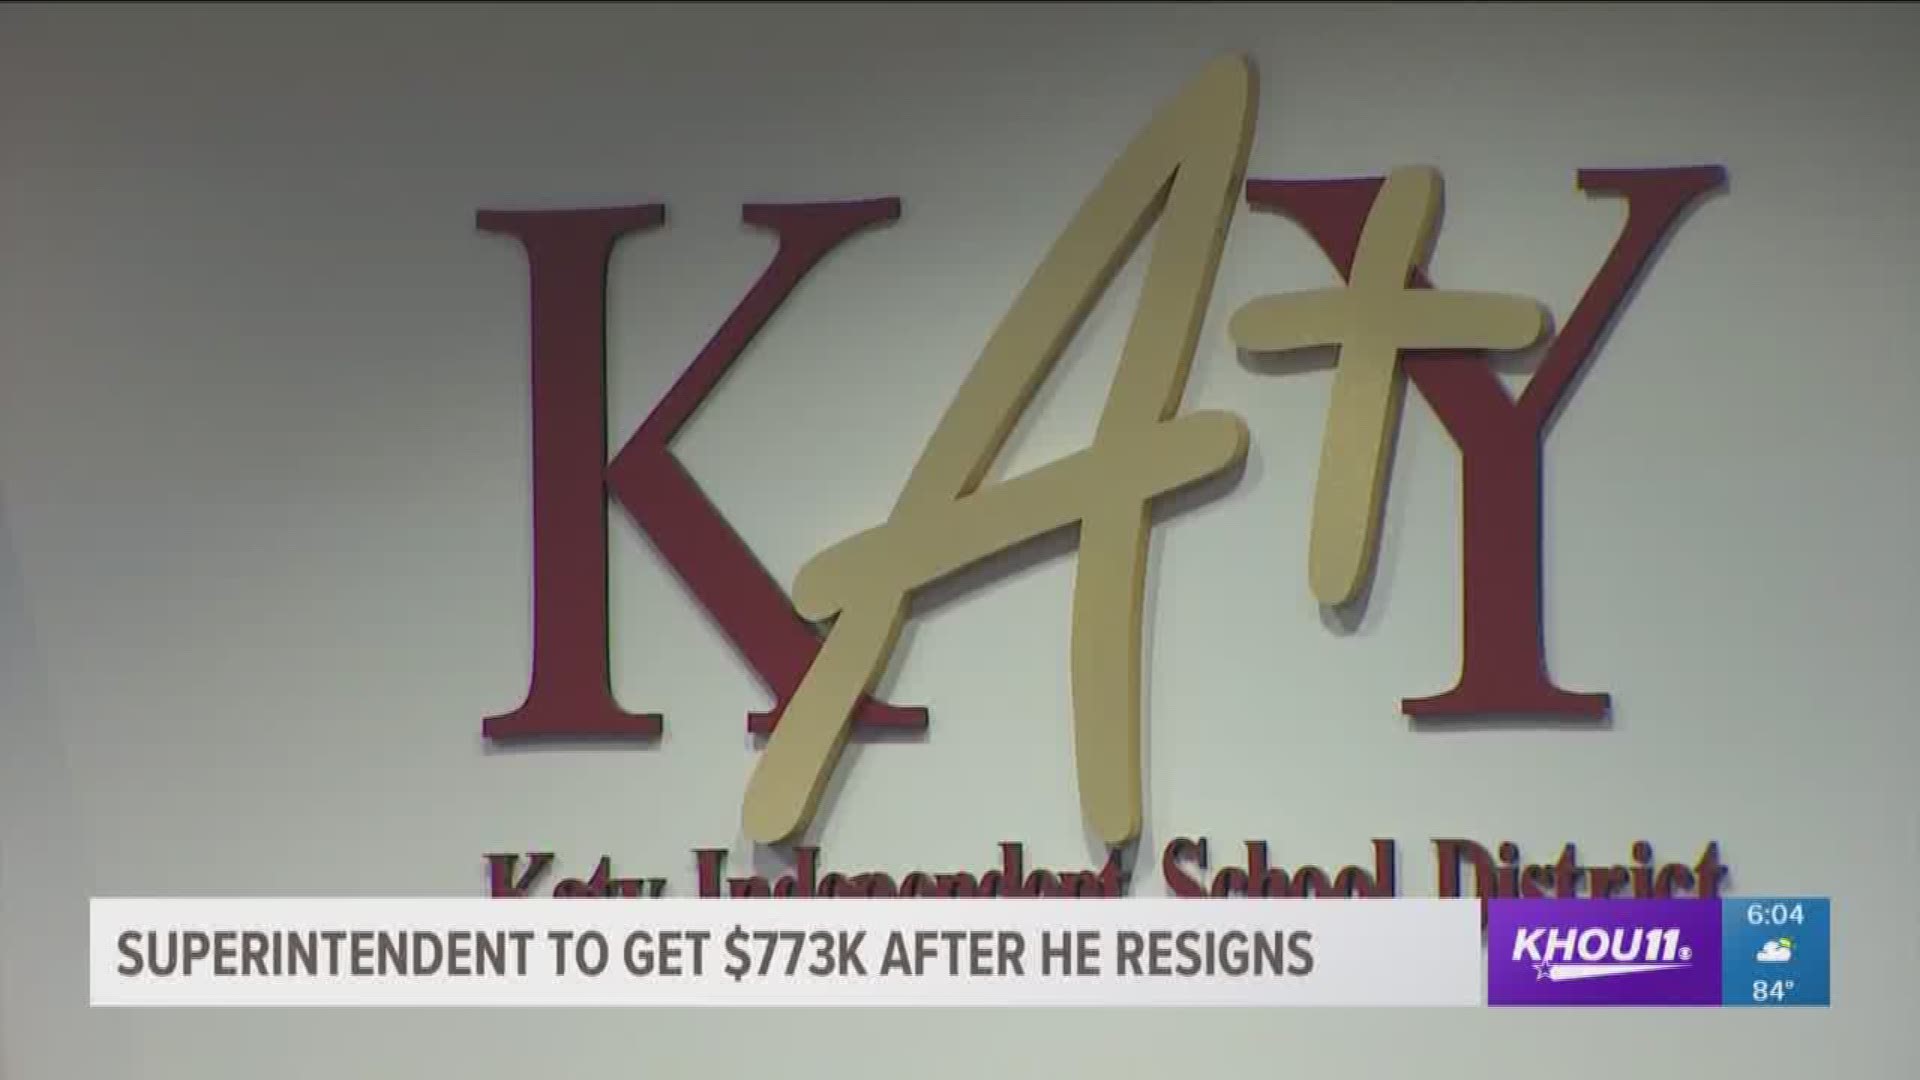 Superintendent to get $773K after resigns